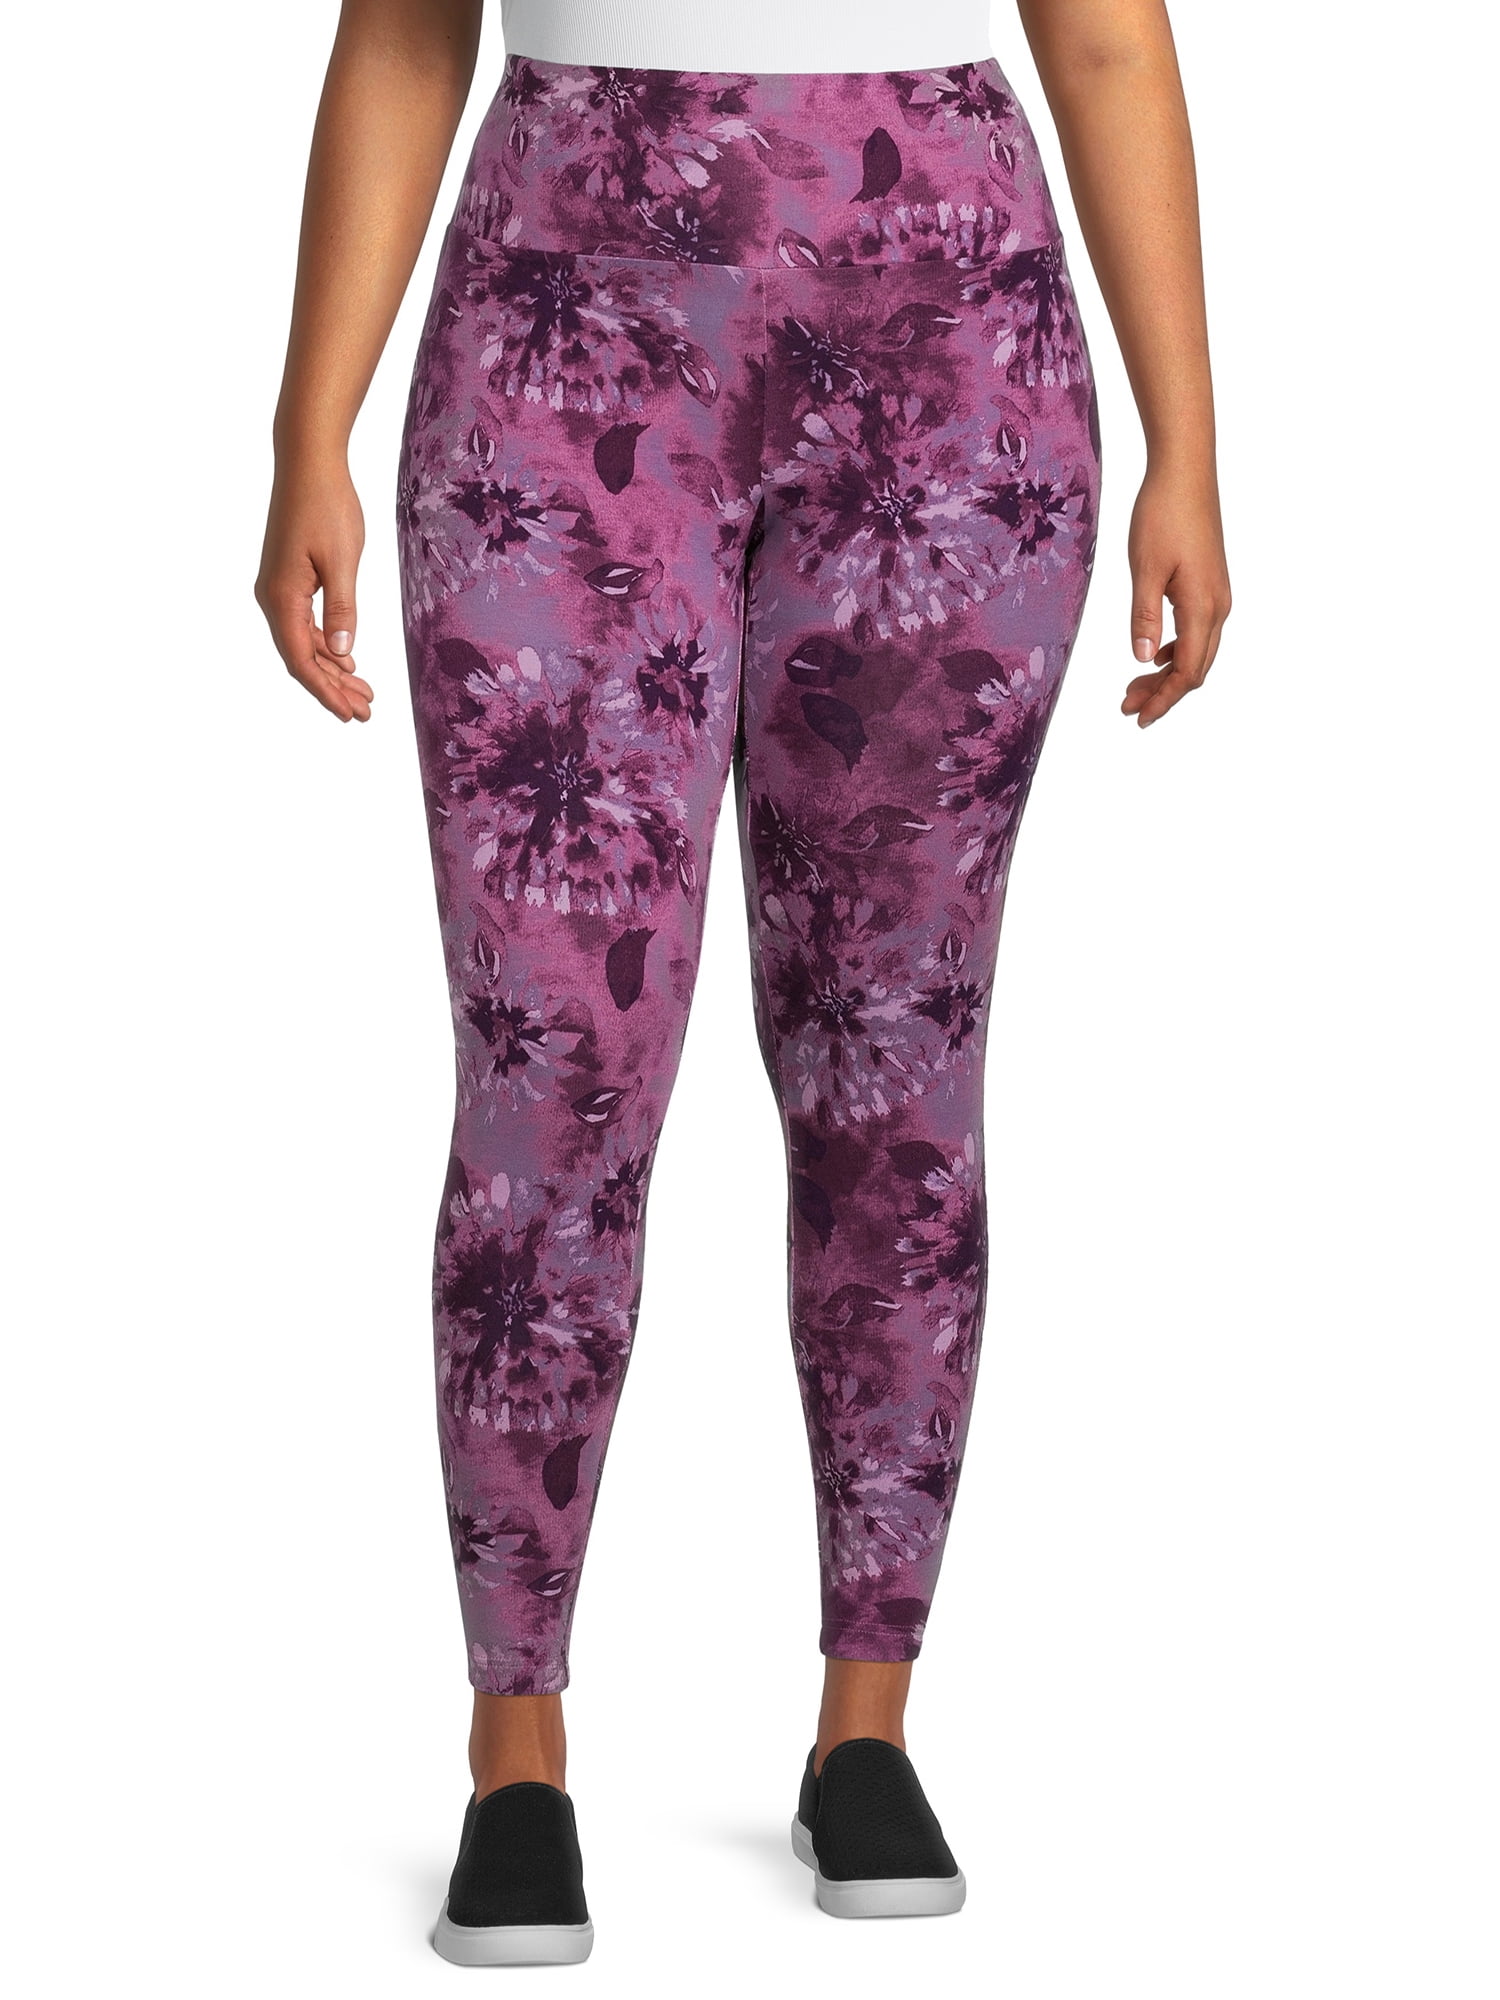 Terra Sky 3X Sports Women Yoga Athletic Out Fitness Running